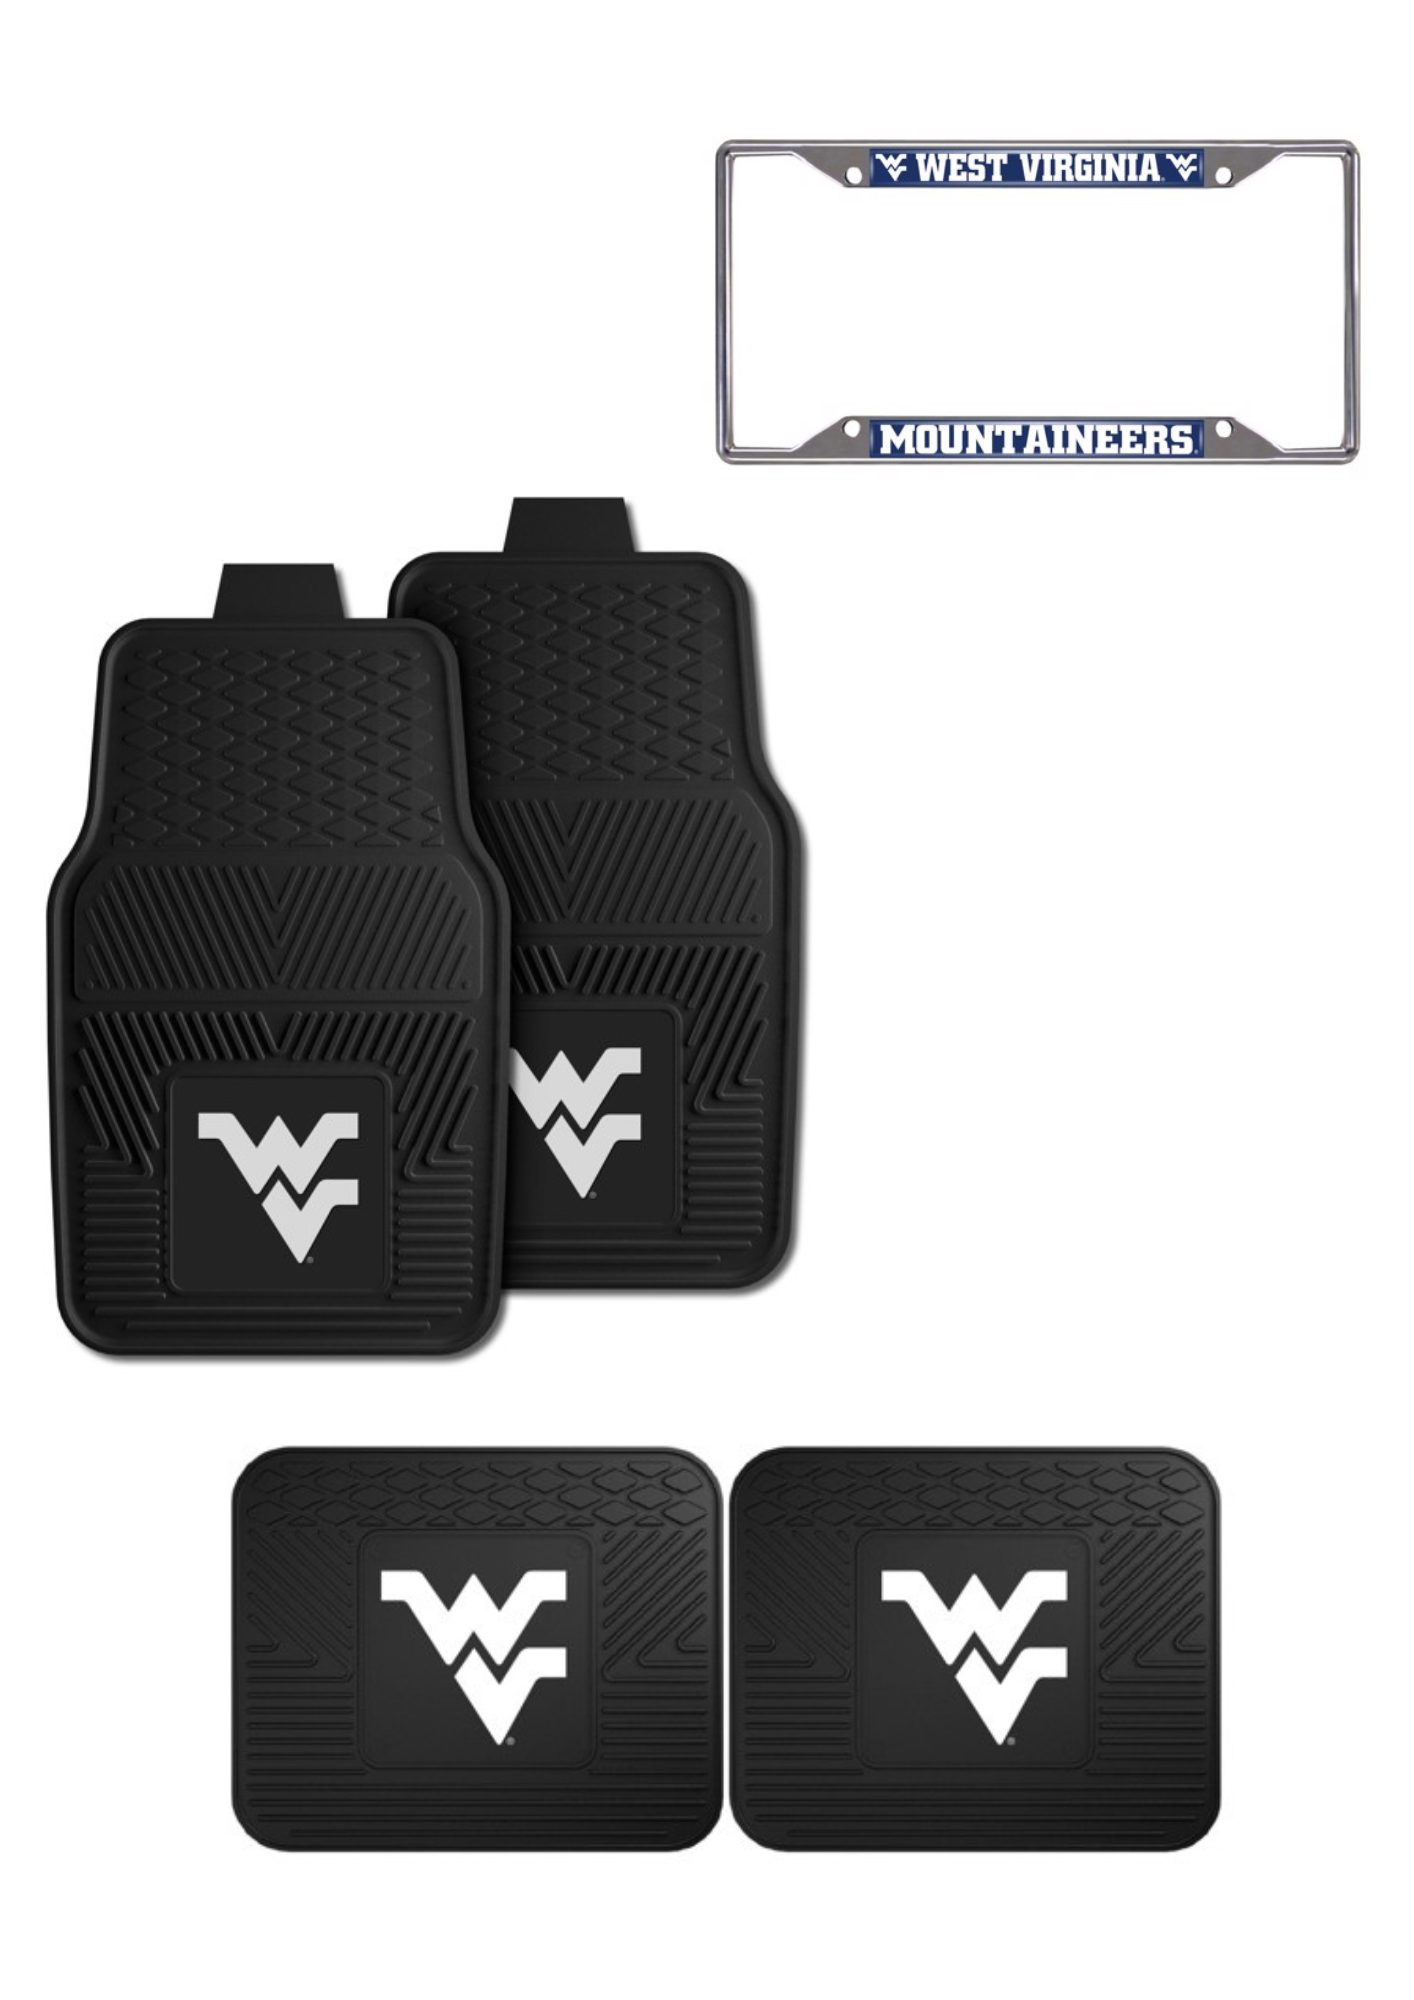 West Virginia Mountaineers Car Accessories, Car Mats & License Plate Frame